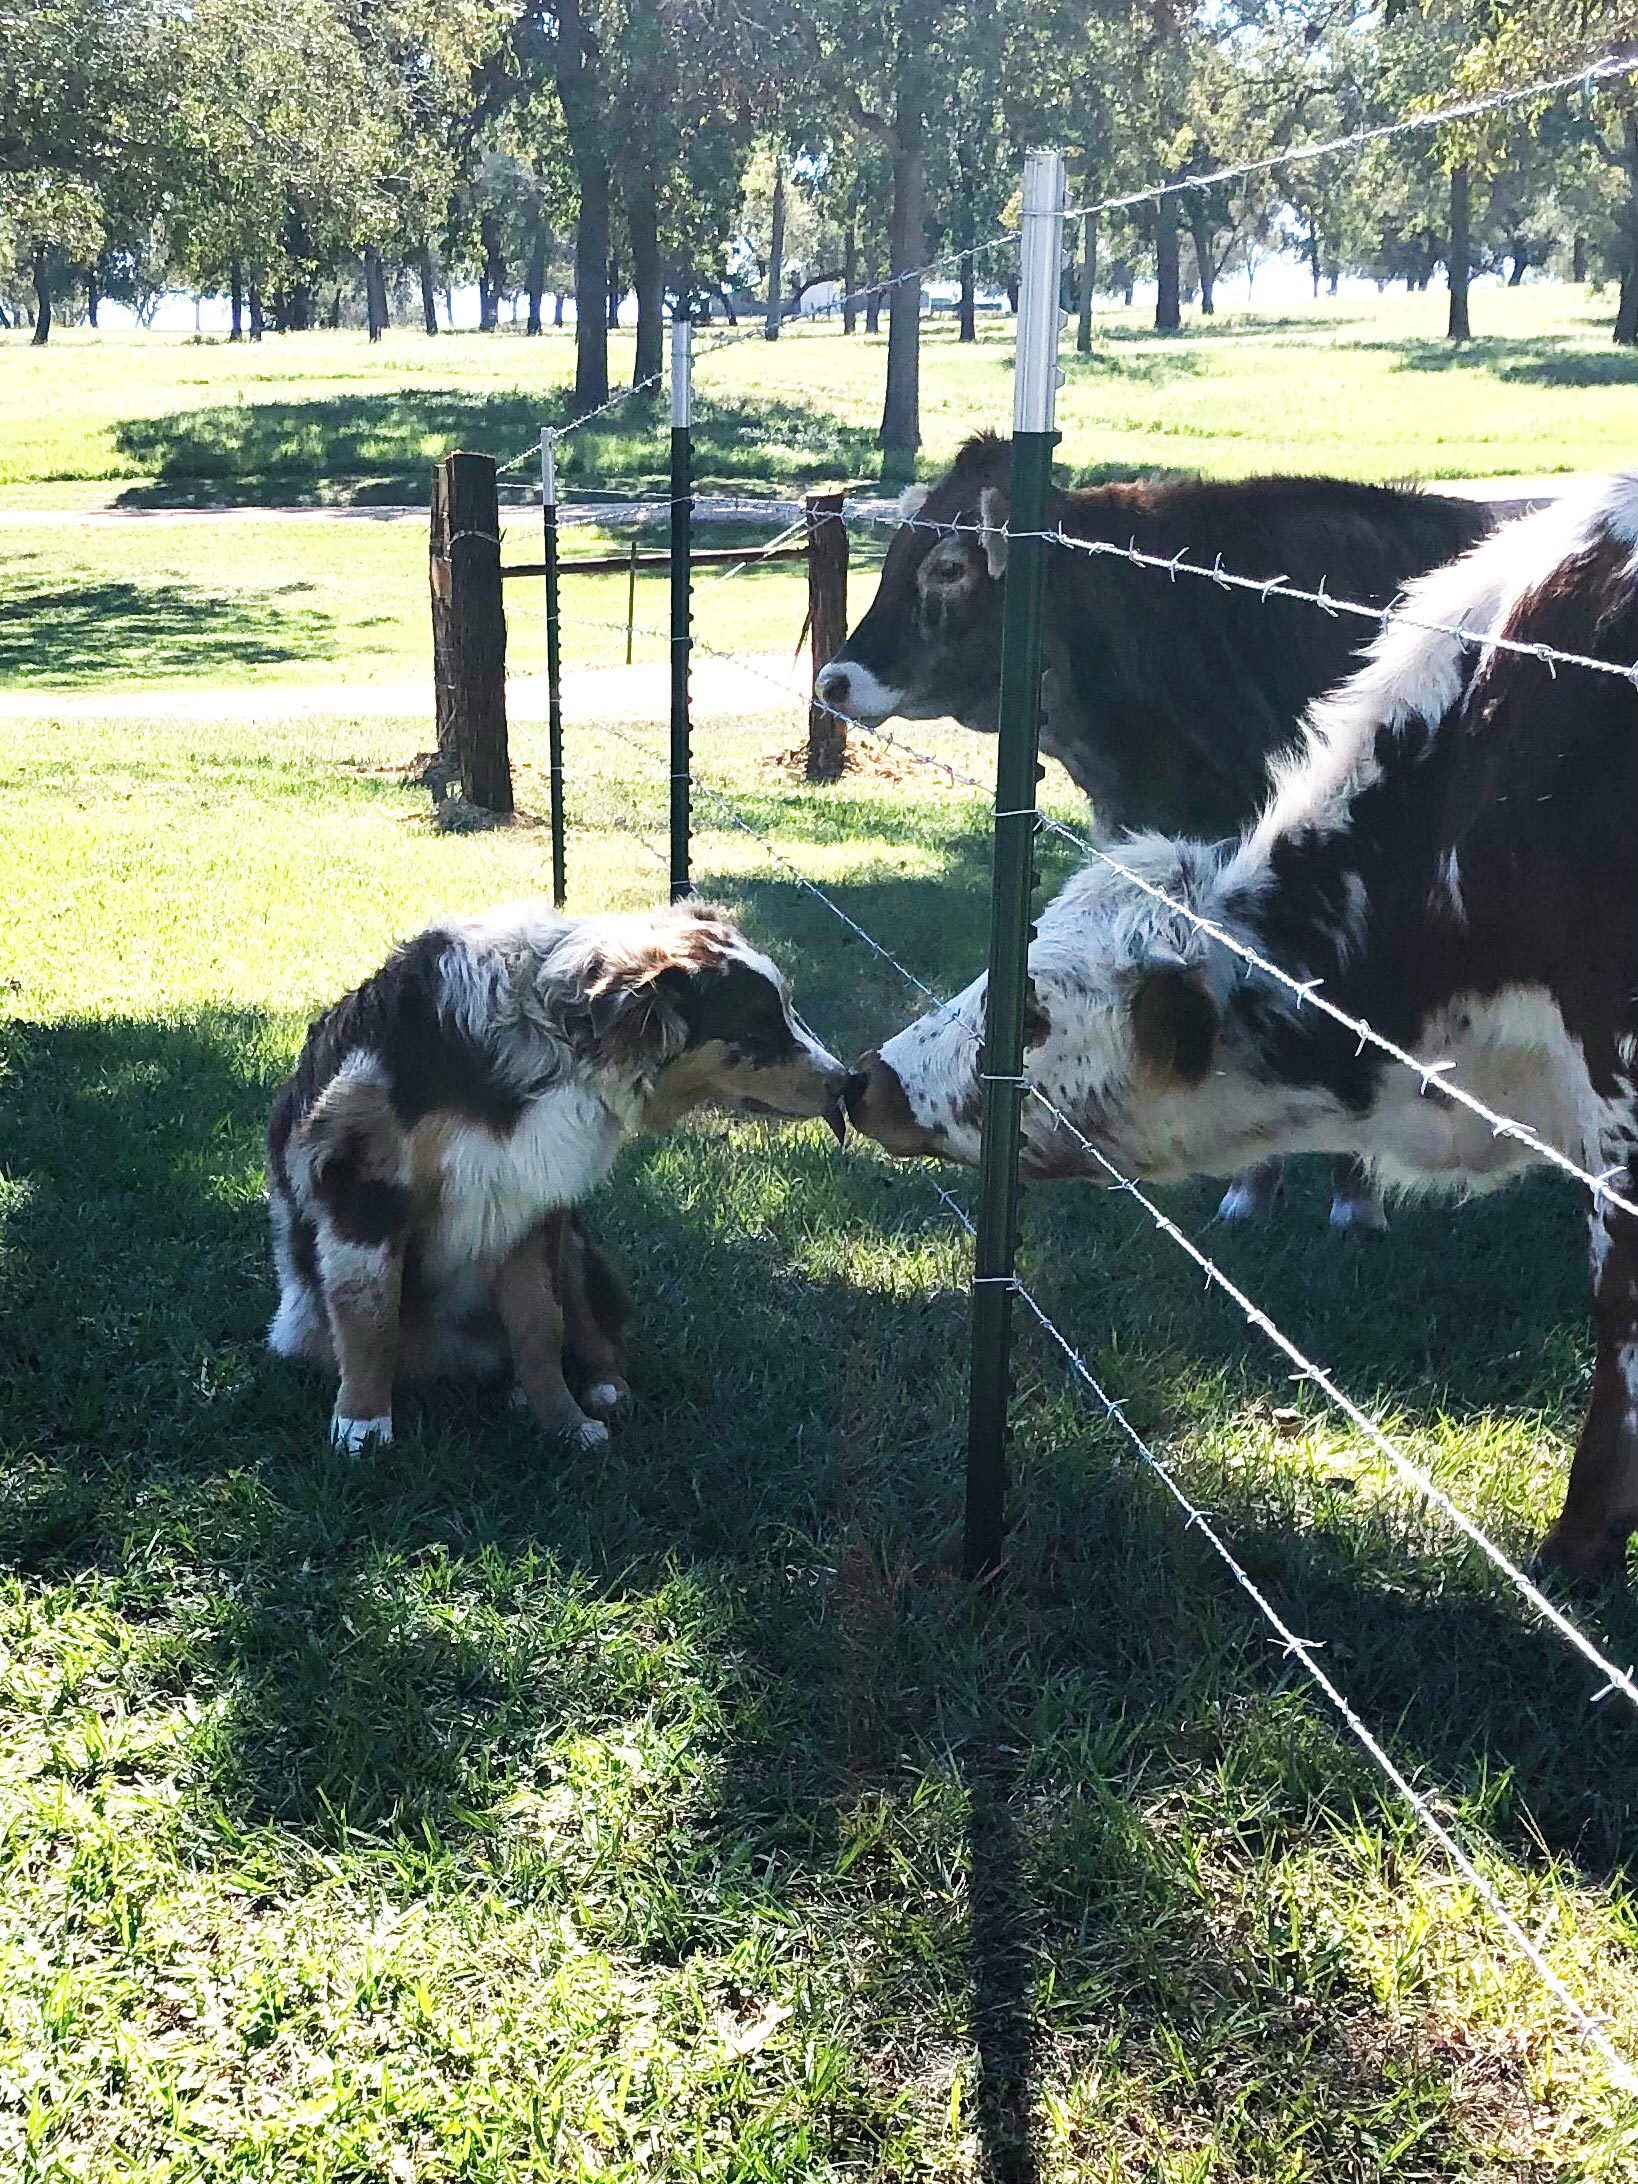 a dog nose-to-nose with a cow on the other side of the fence